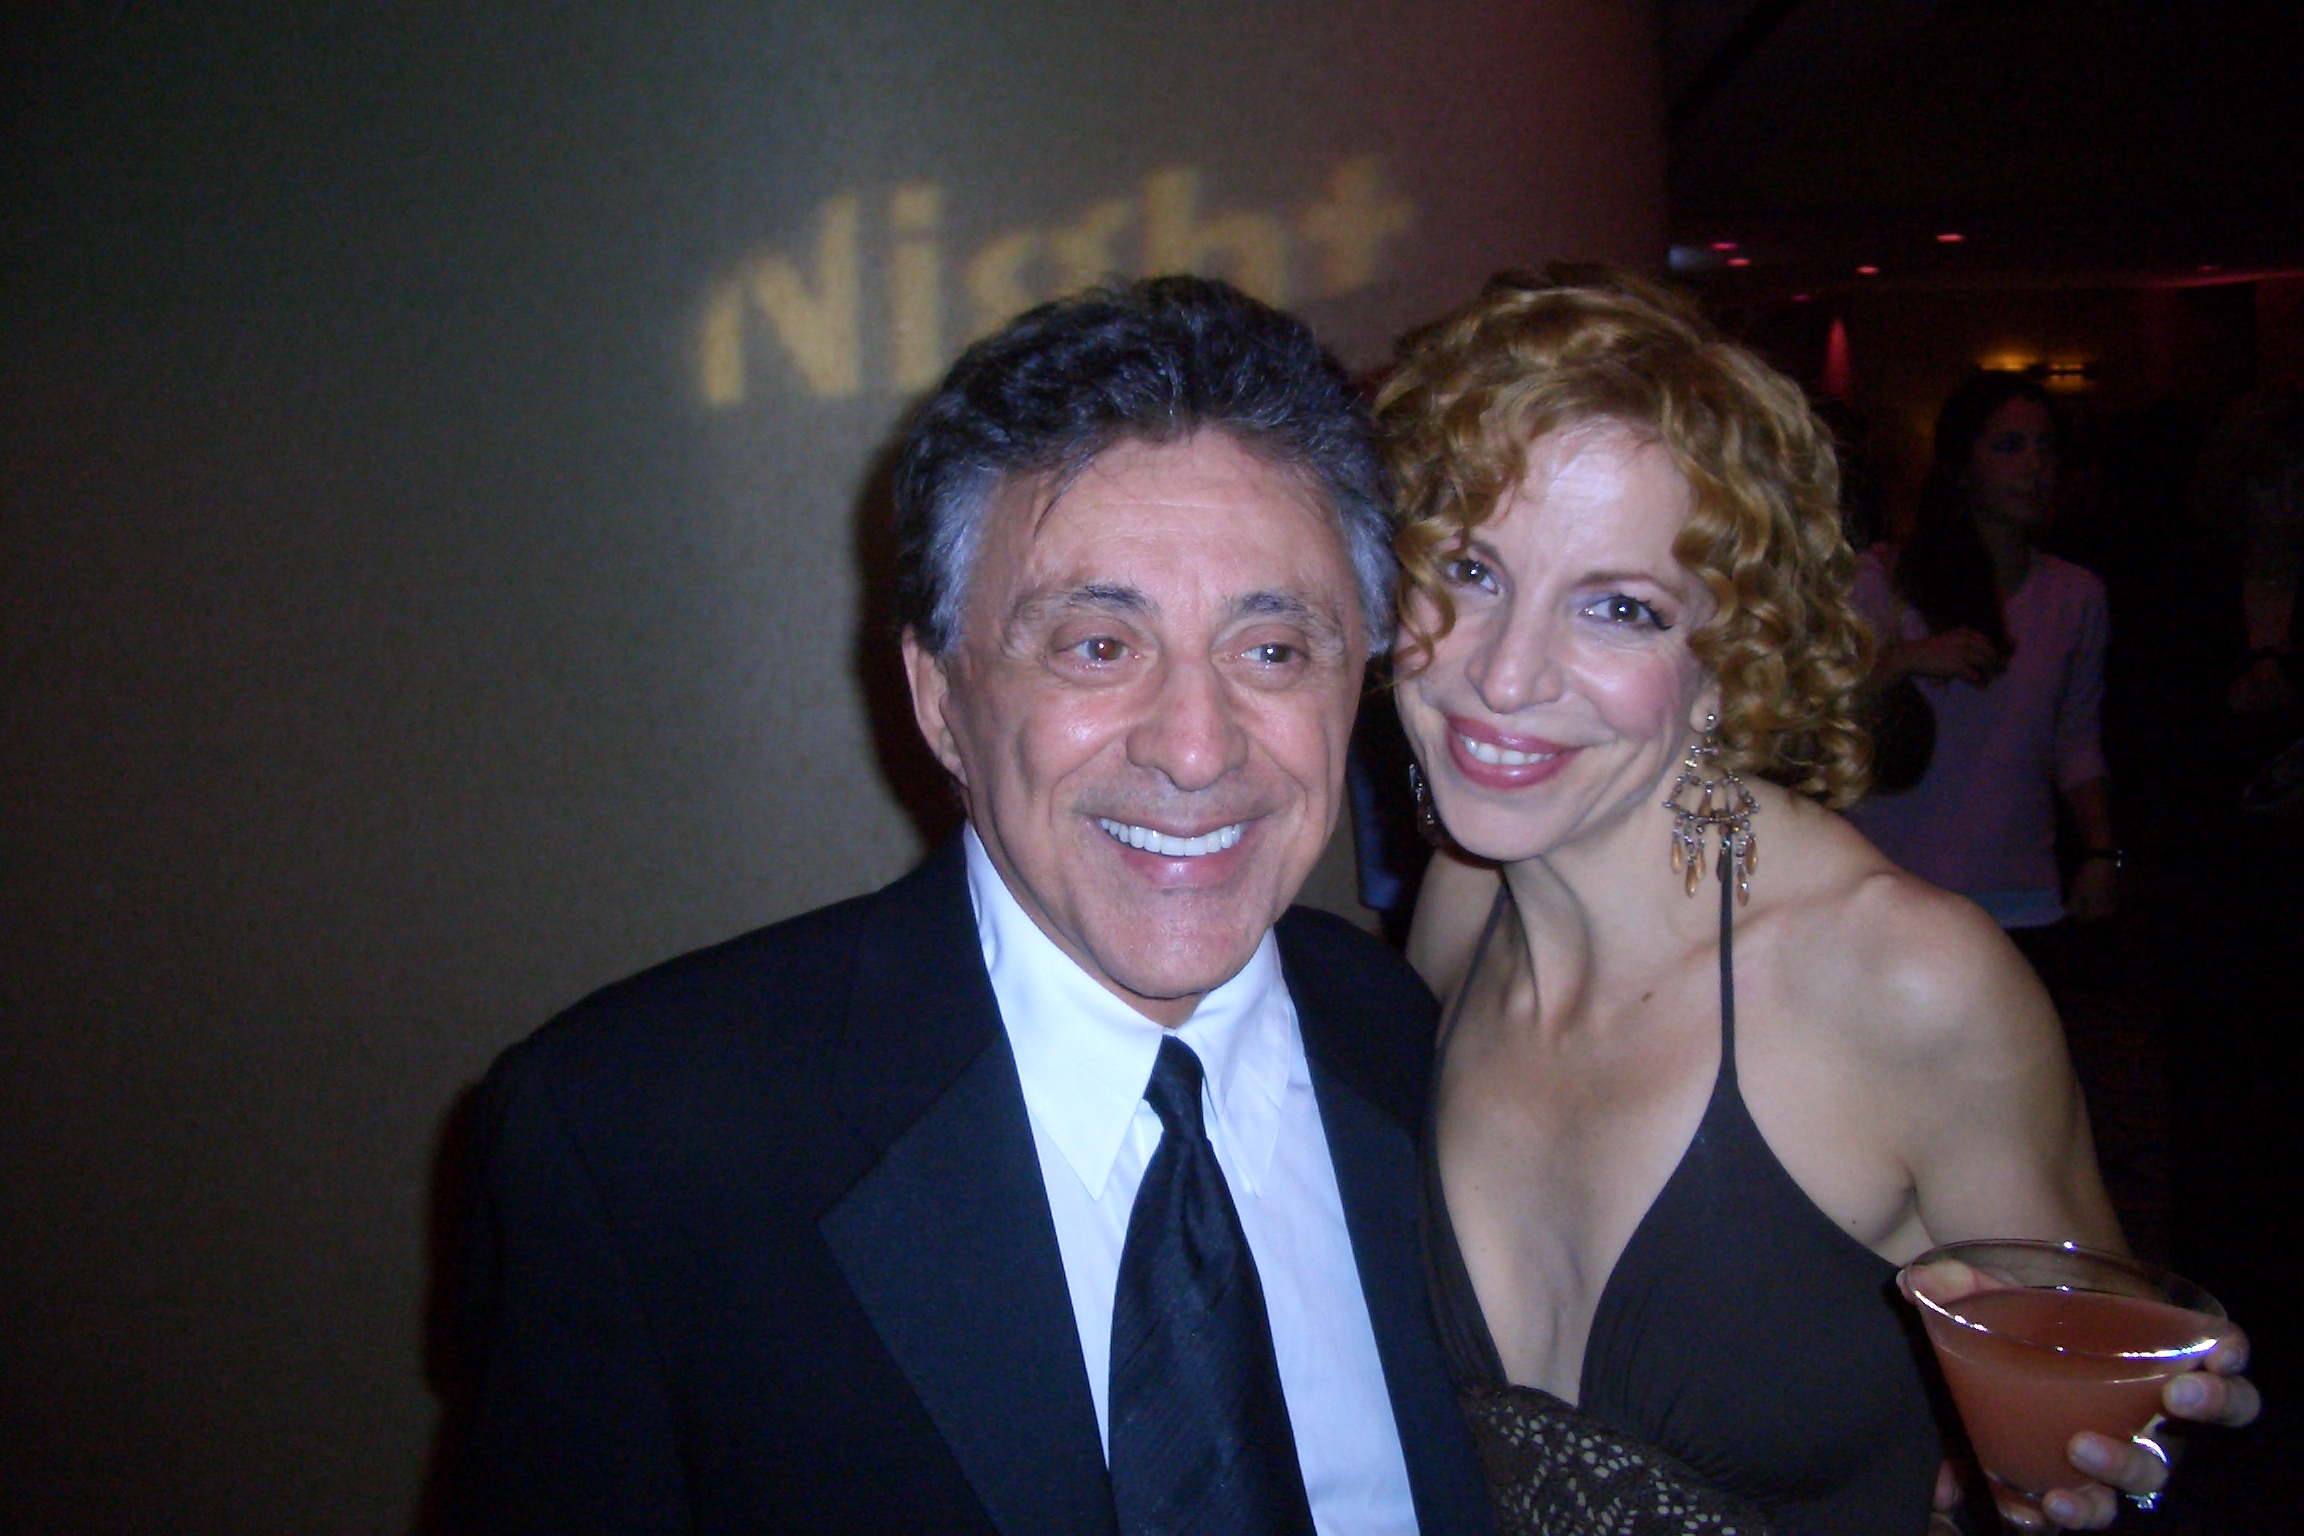 The real Frankie Valli and his stage wife 